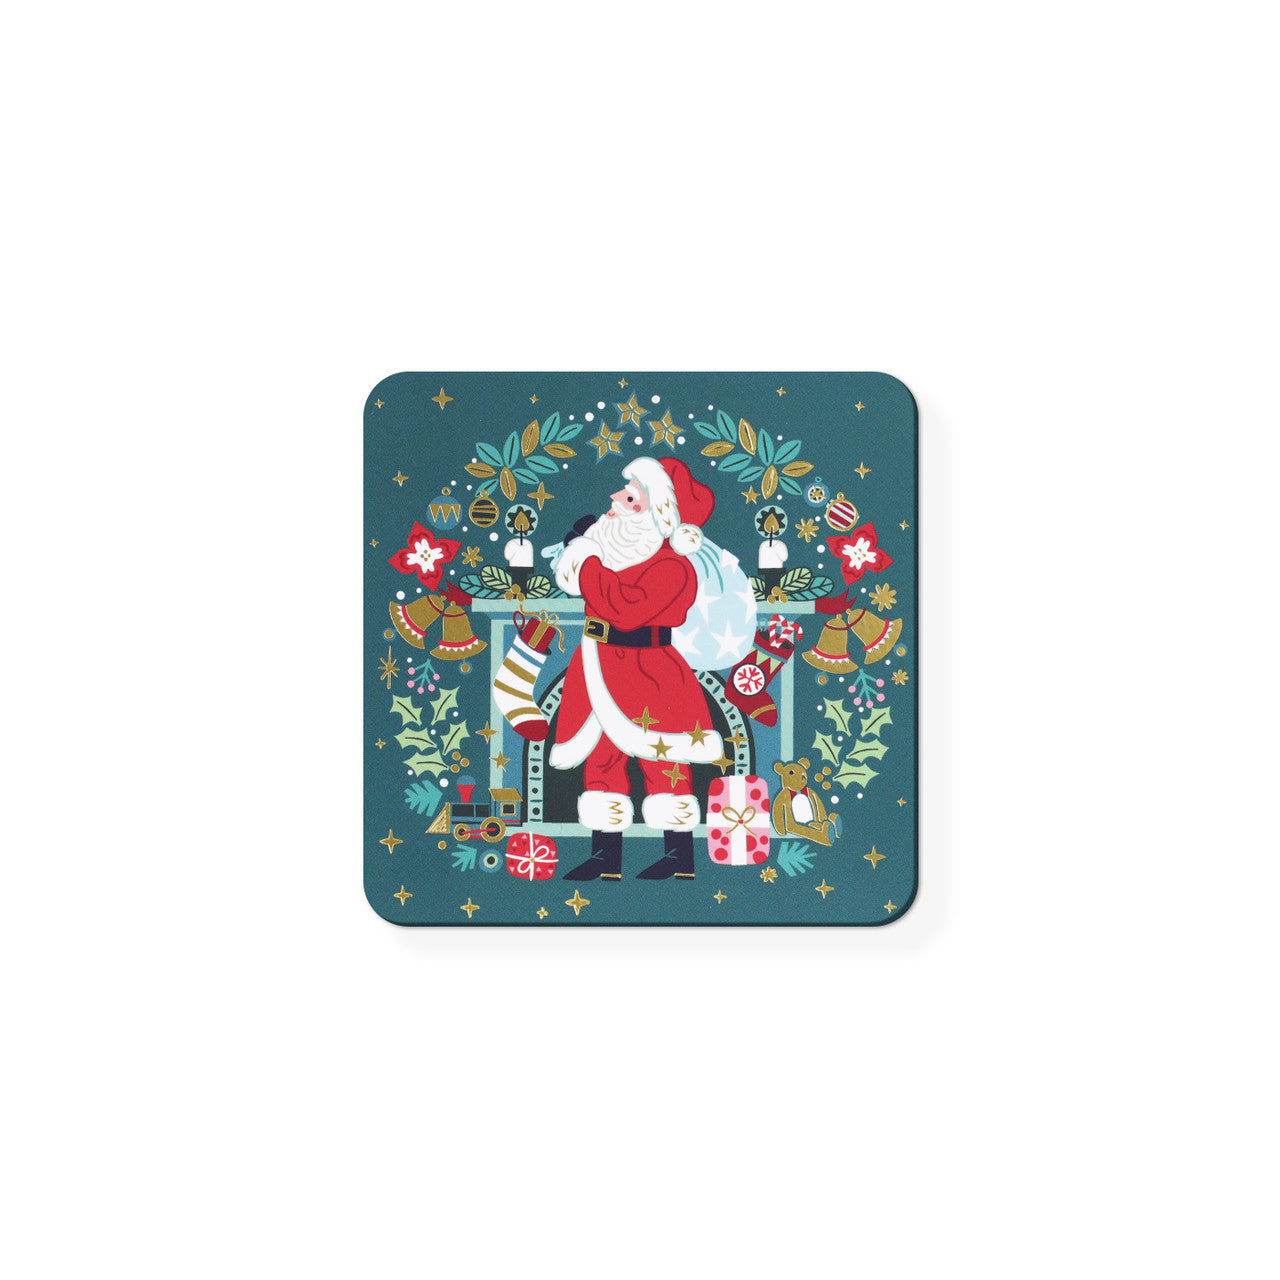 Tipperary Crystal Christmas Coasters Set of 6  Christmas Coasters - NEW 2022  We just Love Christmas! The festive season, the giving of gifts, creating memories and being together with family and loved ones. Have lots of fun with our lovingly designed and created Christmas decorations, each one has a magic sparkle of elf dust!